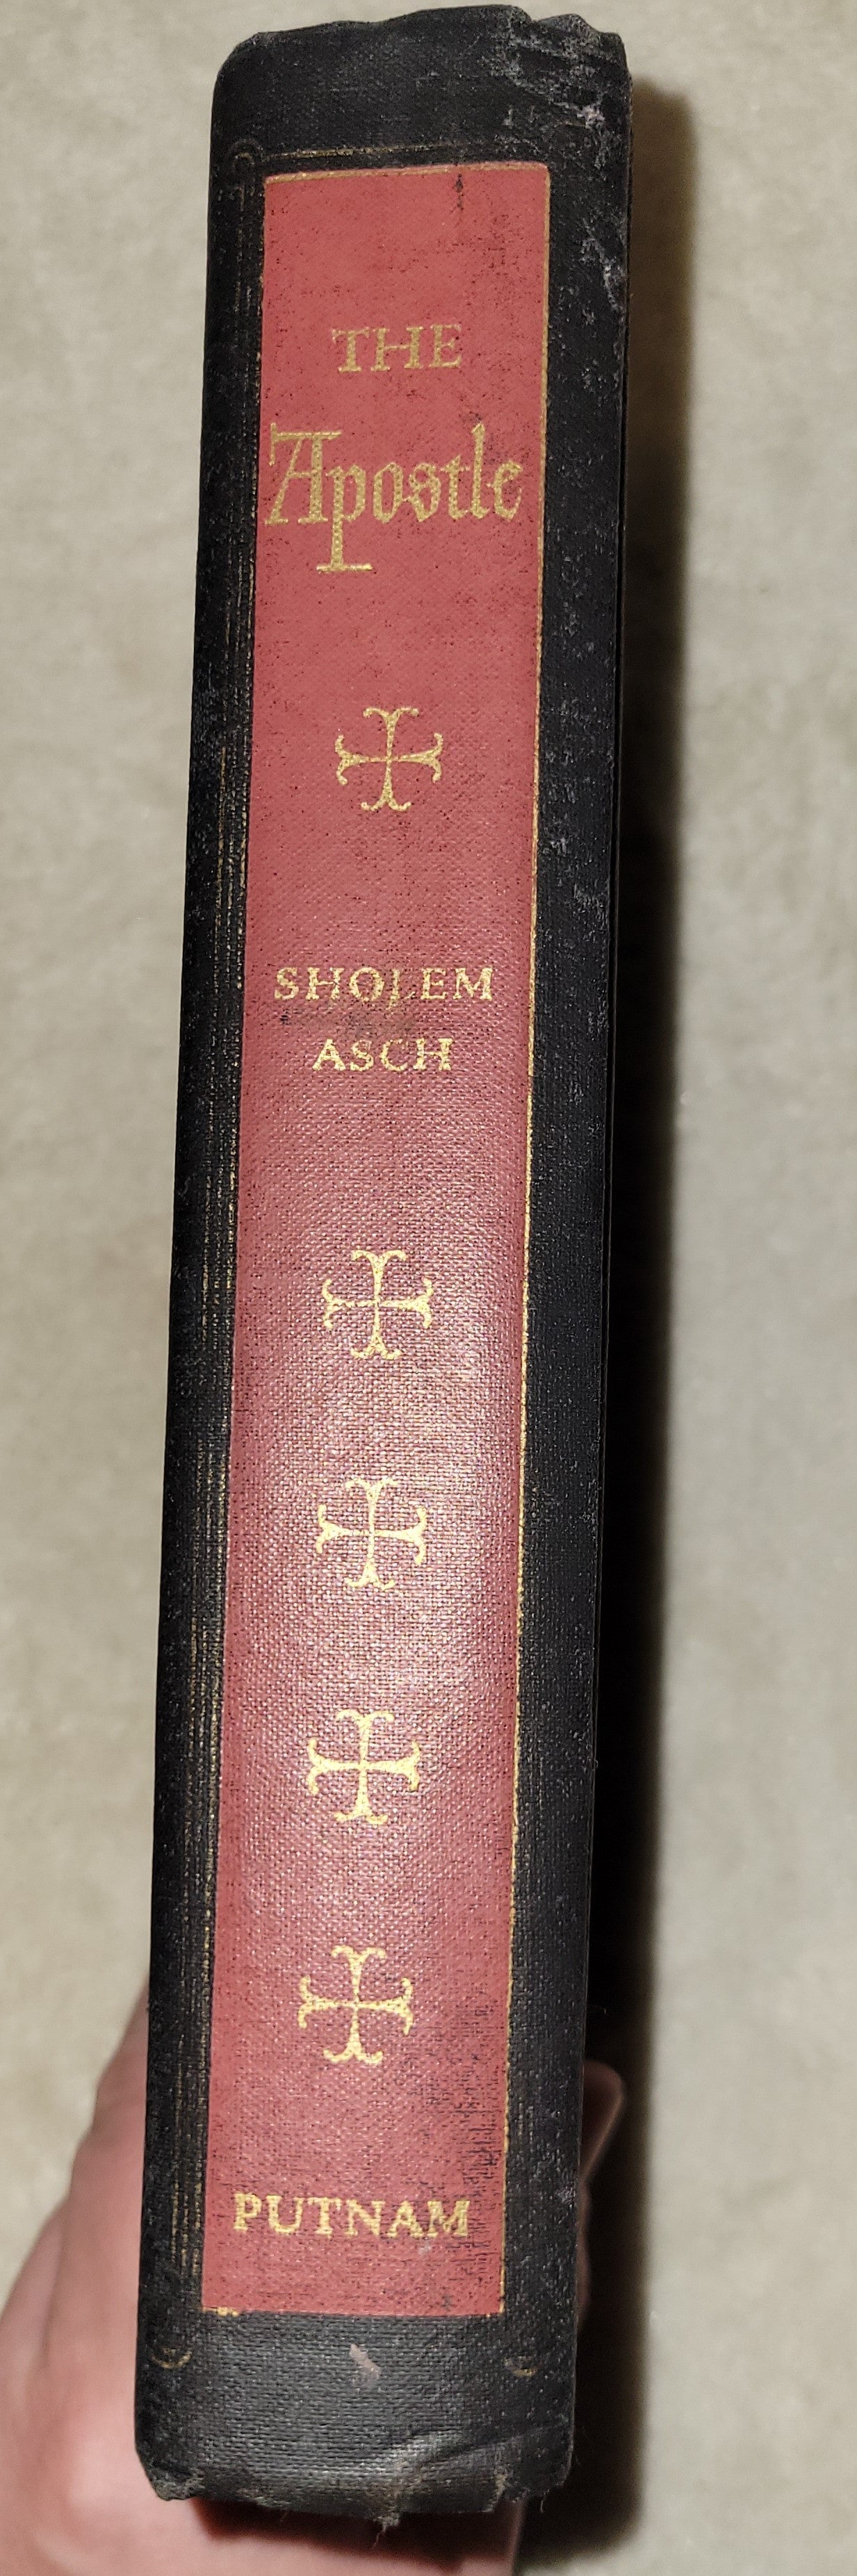 Vintage book for sale “The Apostle” by Sholem Asch published by H. Wolff Book Mfg. Company, 1943. Spine.